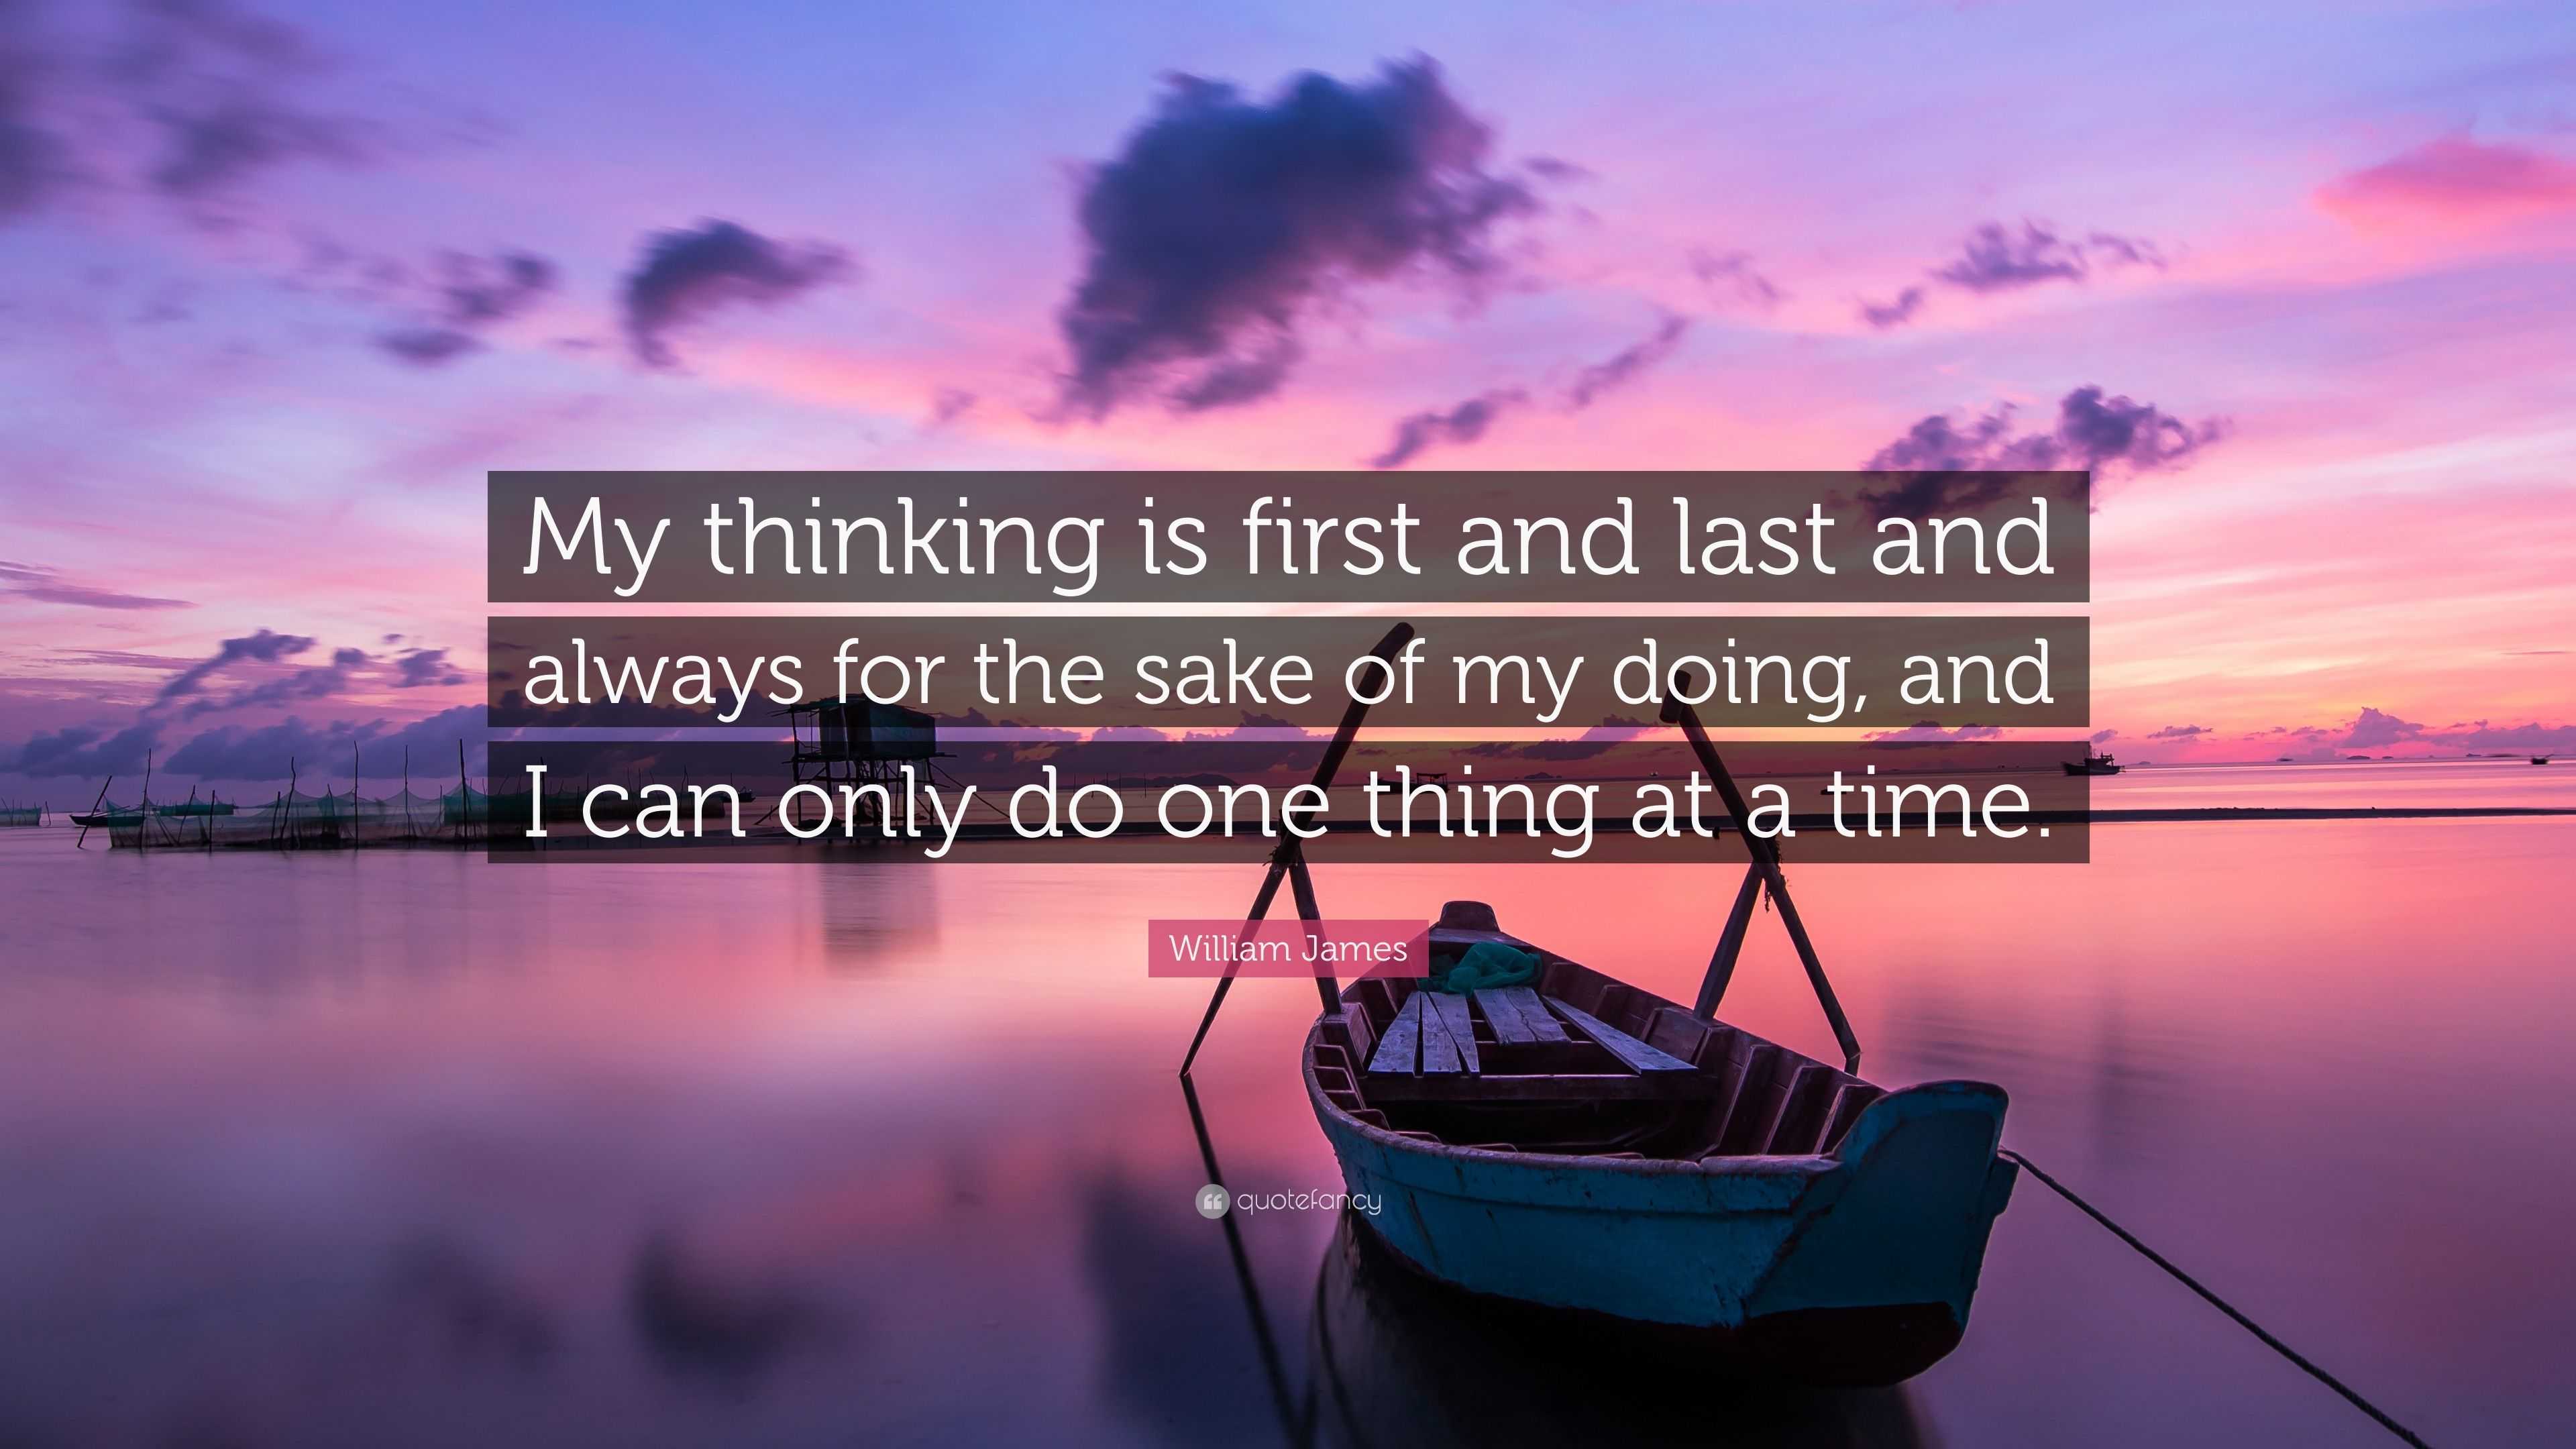 William James Quote: “My thinking is first and last and always for the ...